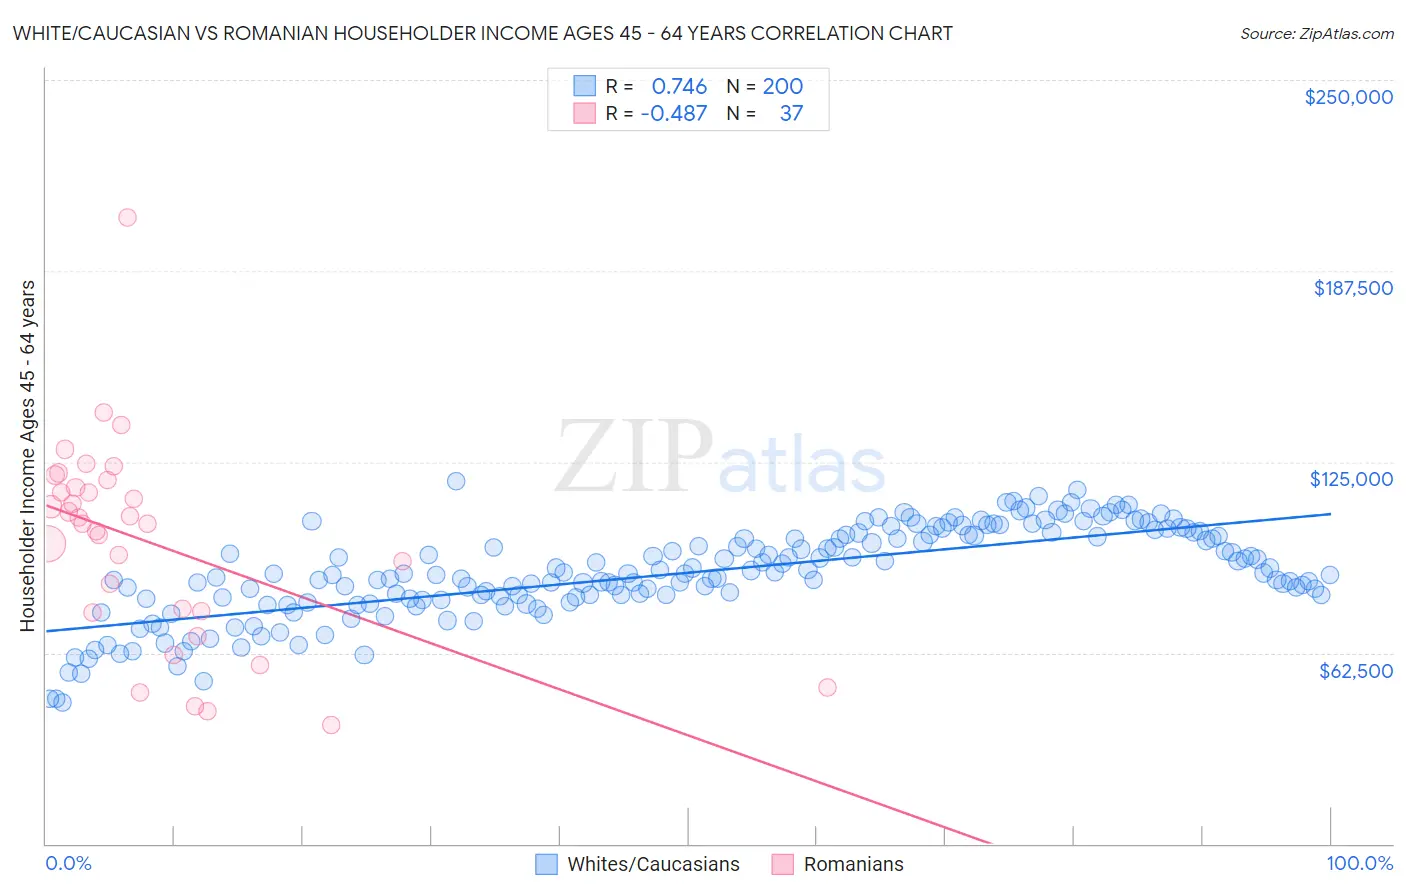 White/Caucasian vs Romanian Householder Income Ages 45 - 64 years